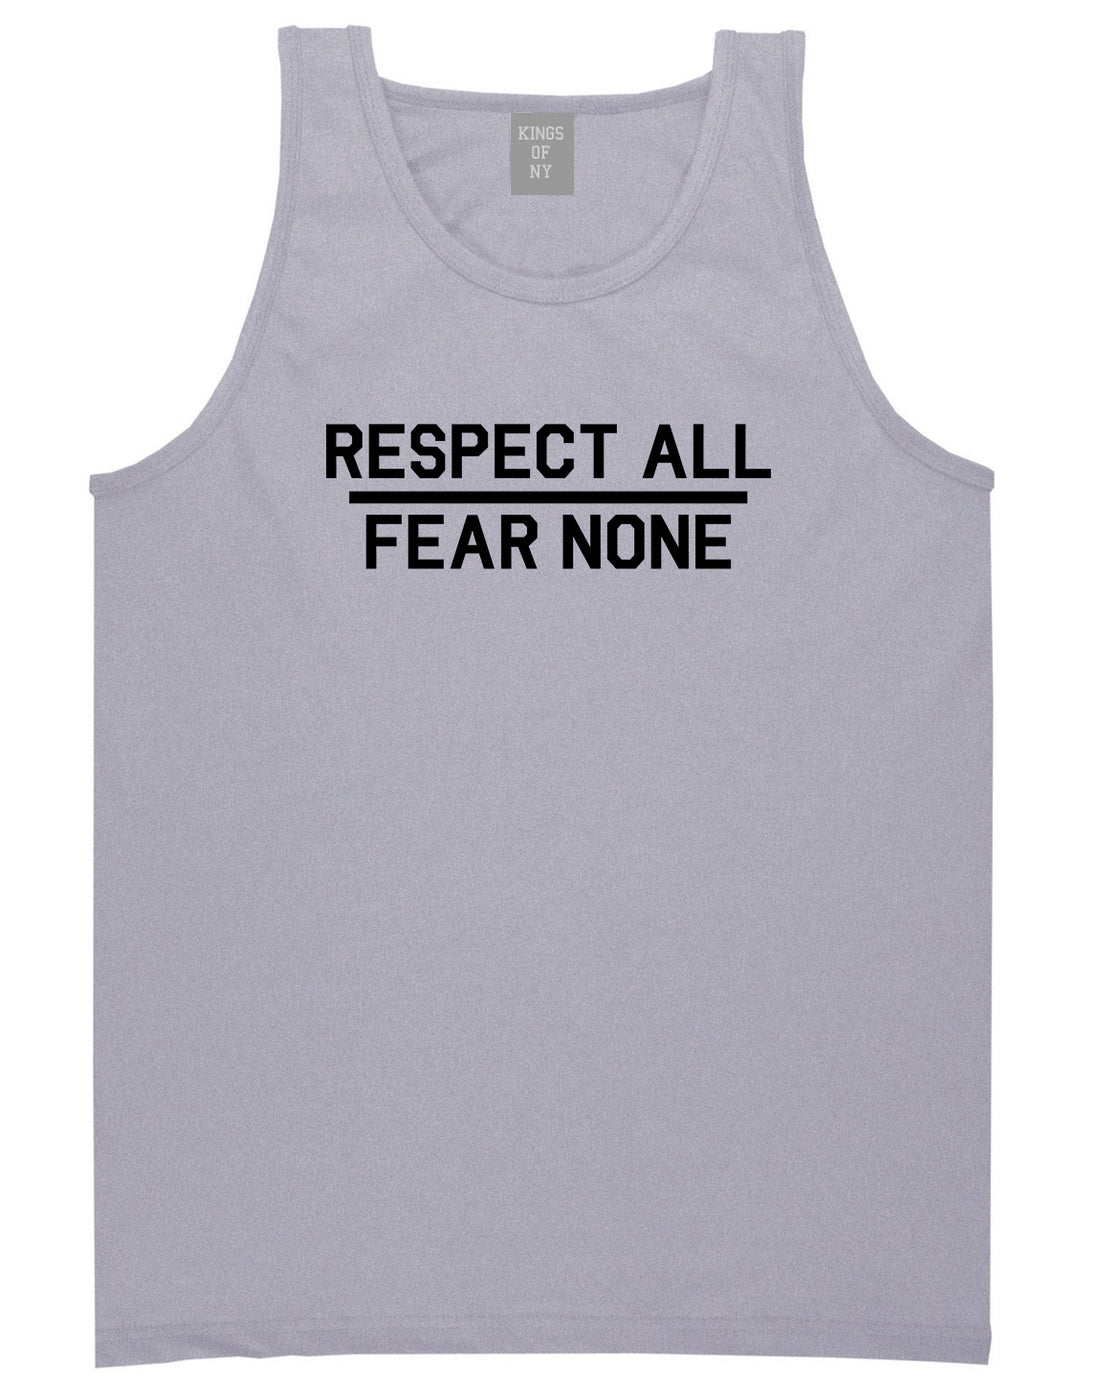 Respect All Fear None Mens Tank Top Shirt Grey by Kings Of NY